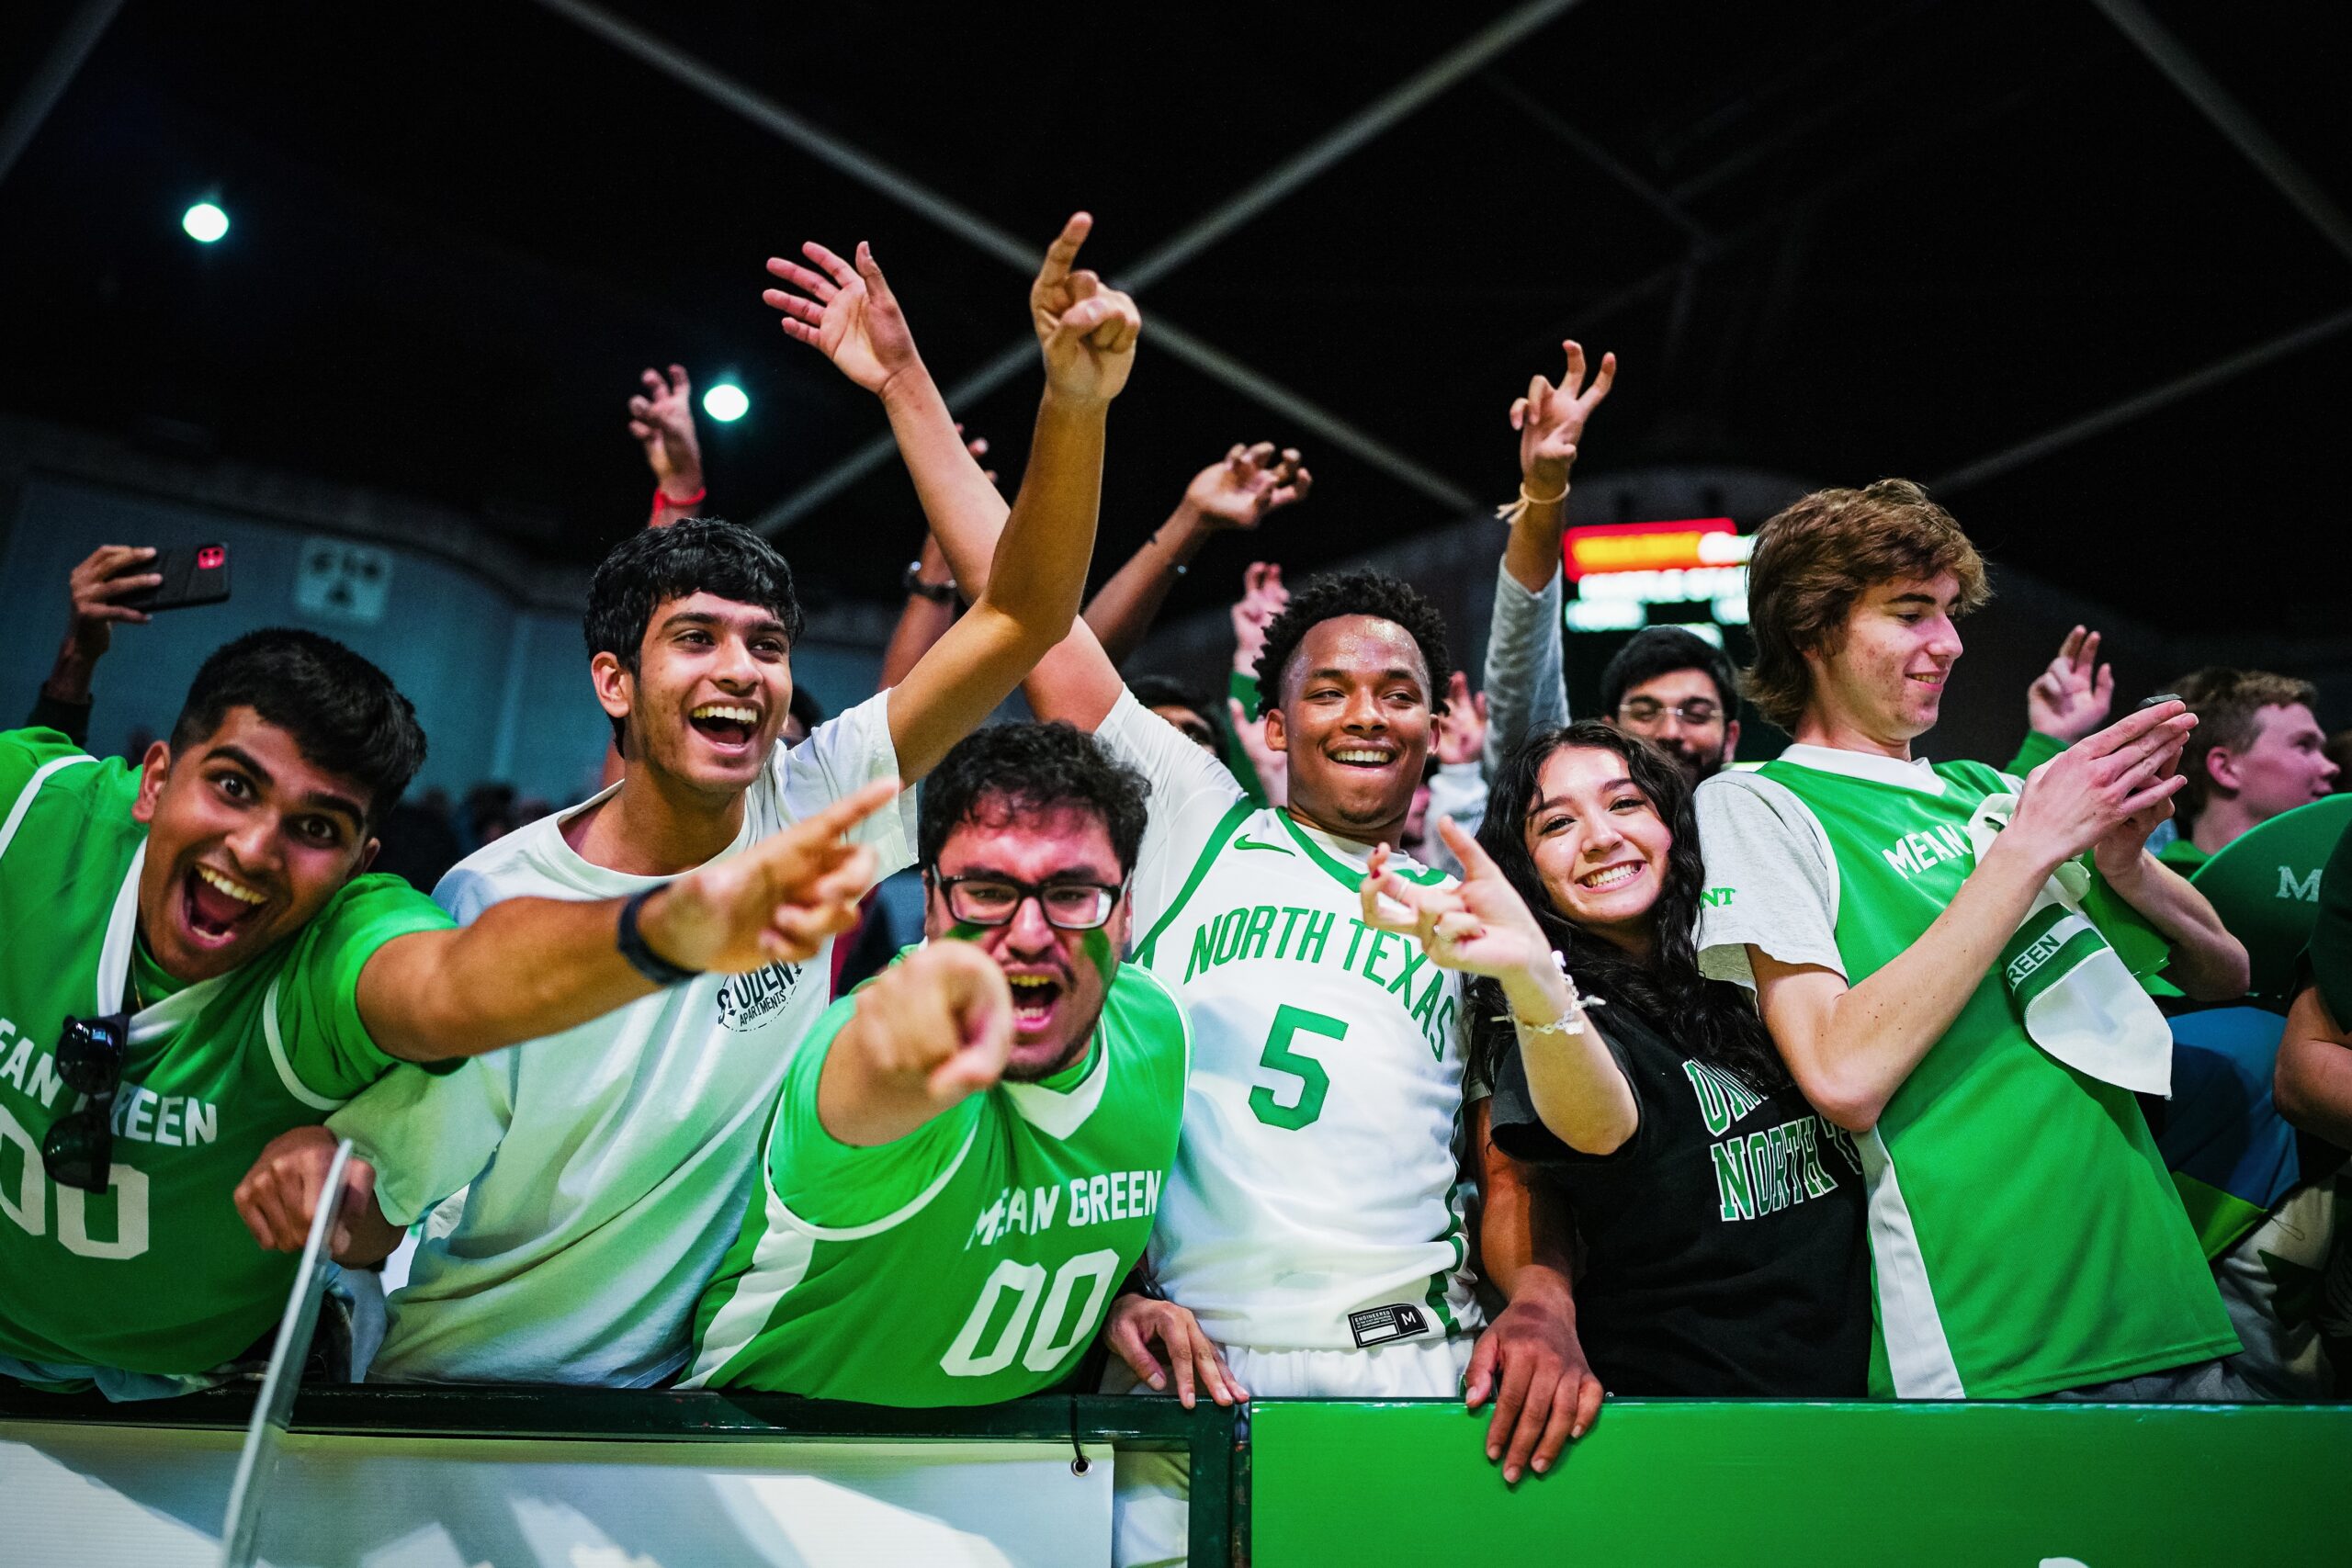 UNT Mean Green Maniacs student section celebrating after a win.